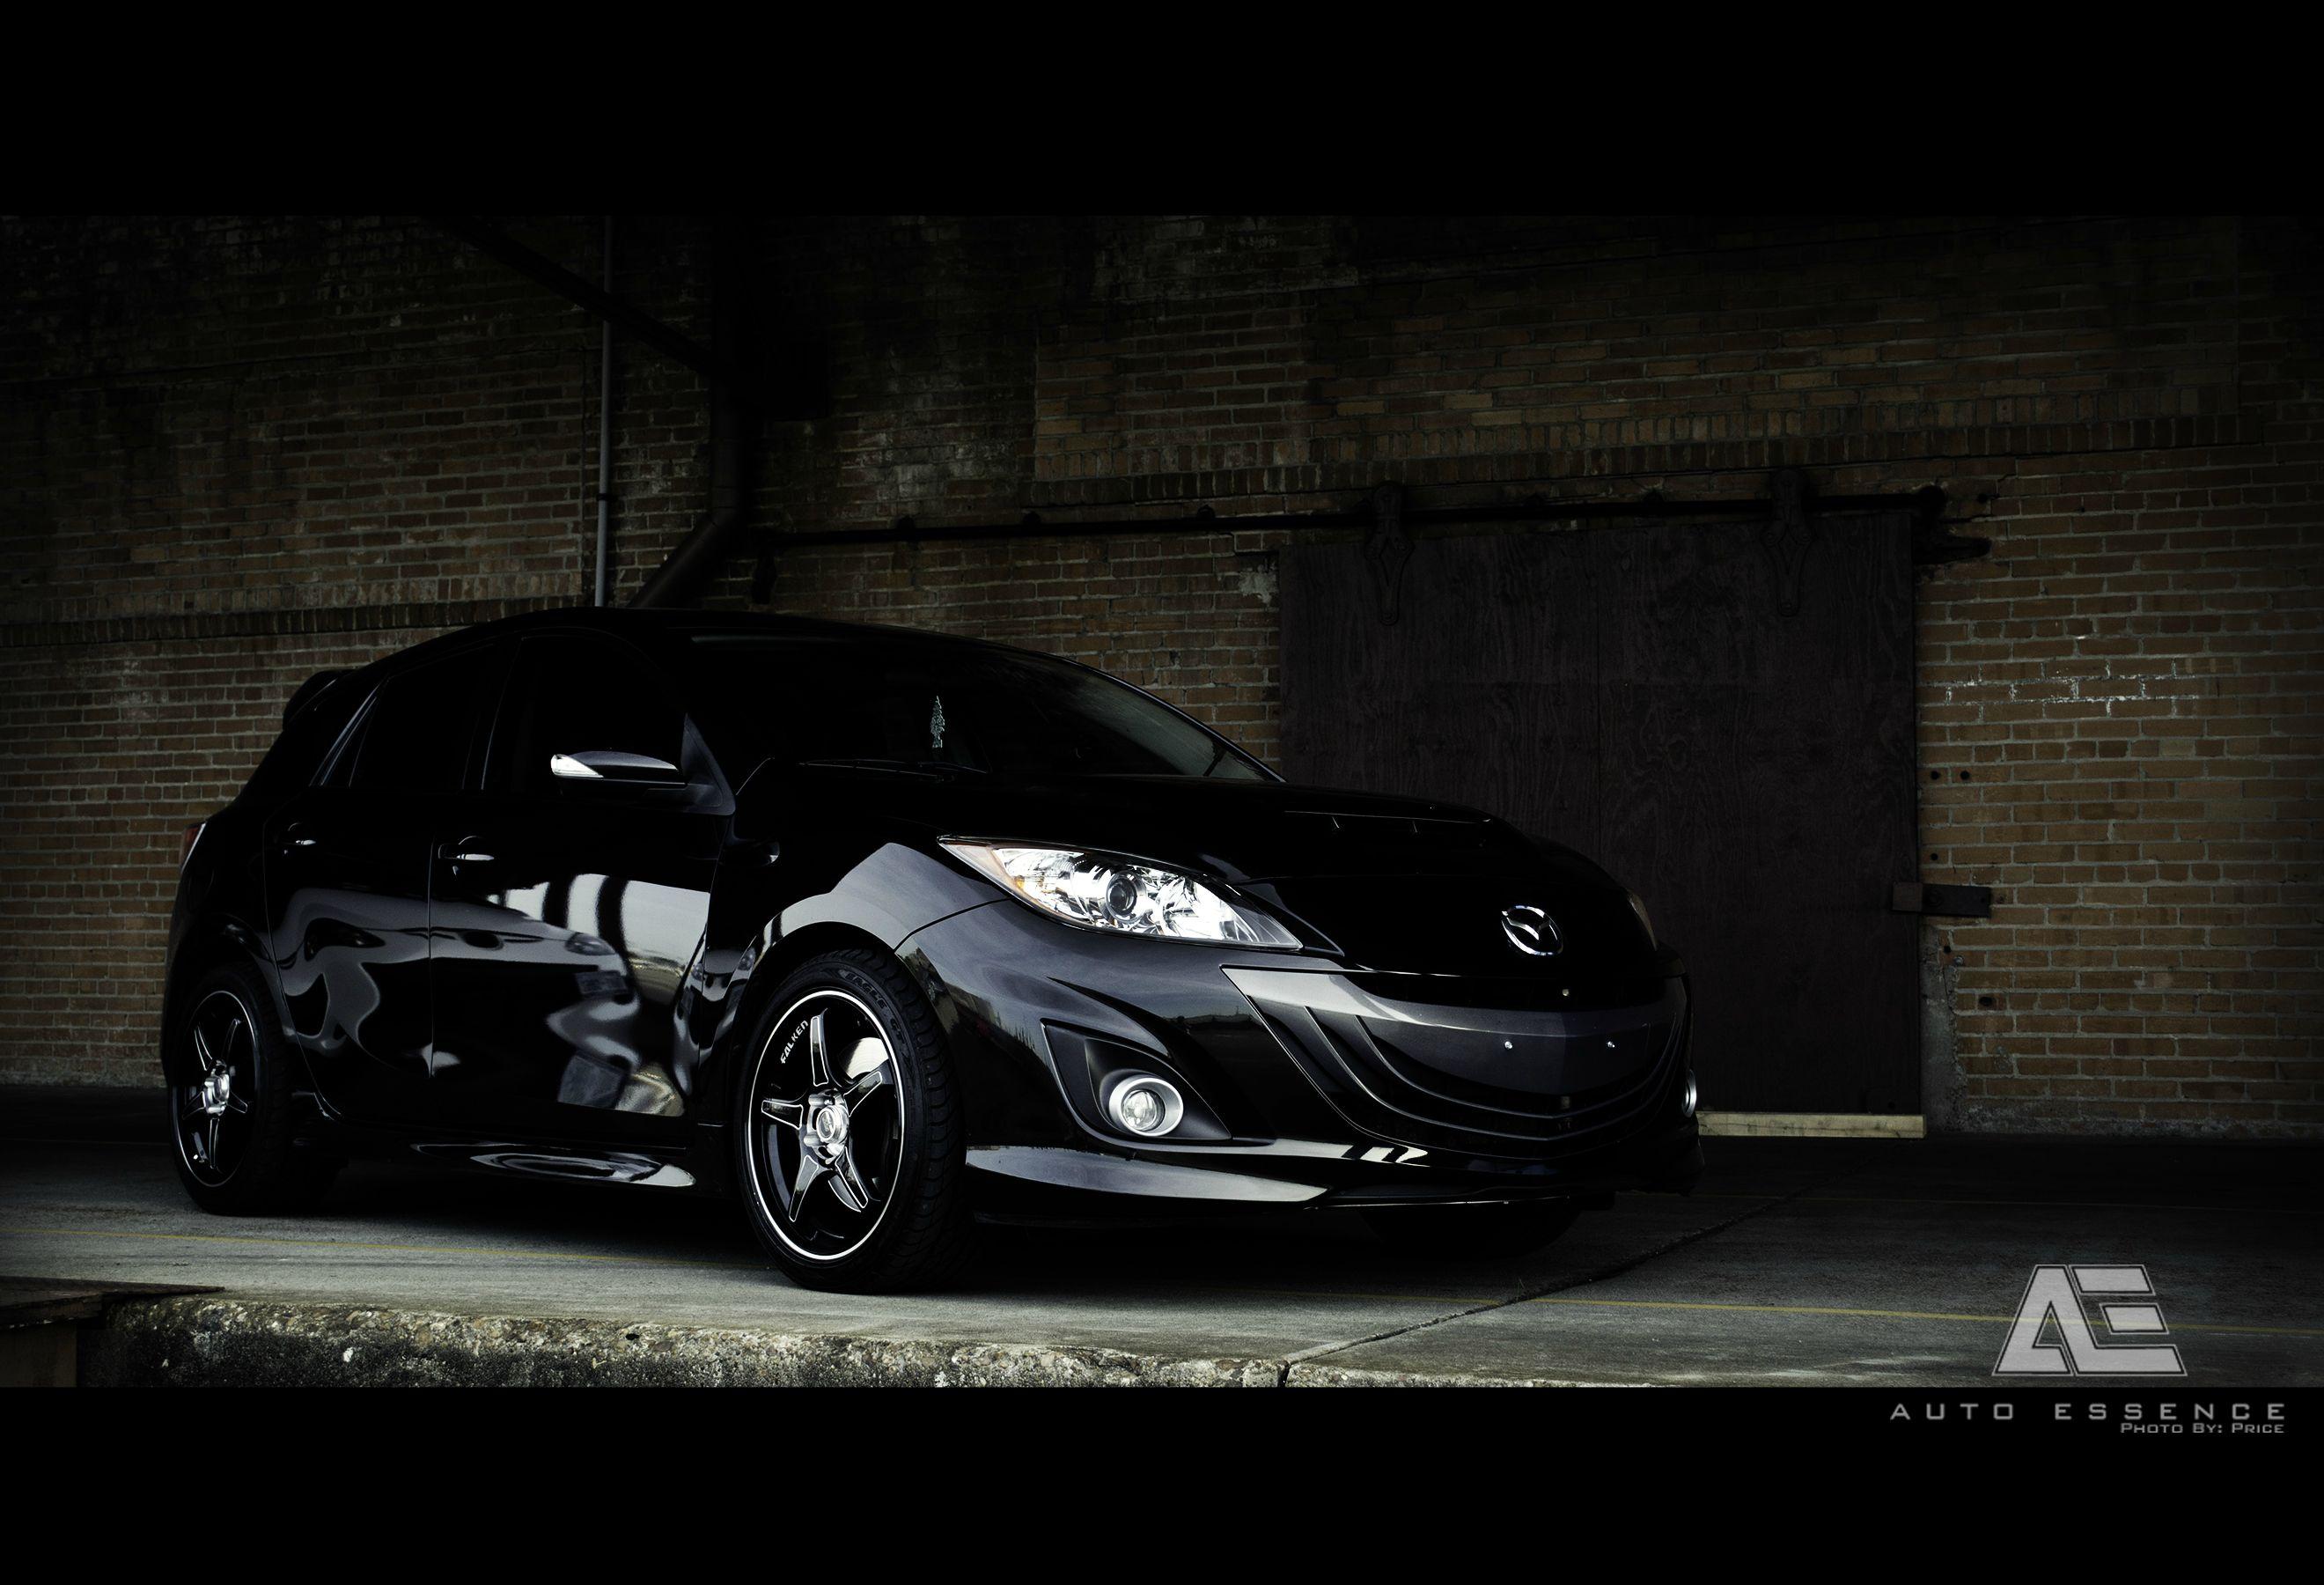 Thinking about buying a Mazdaspeed 3. Thoughts?.com